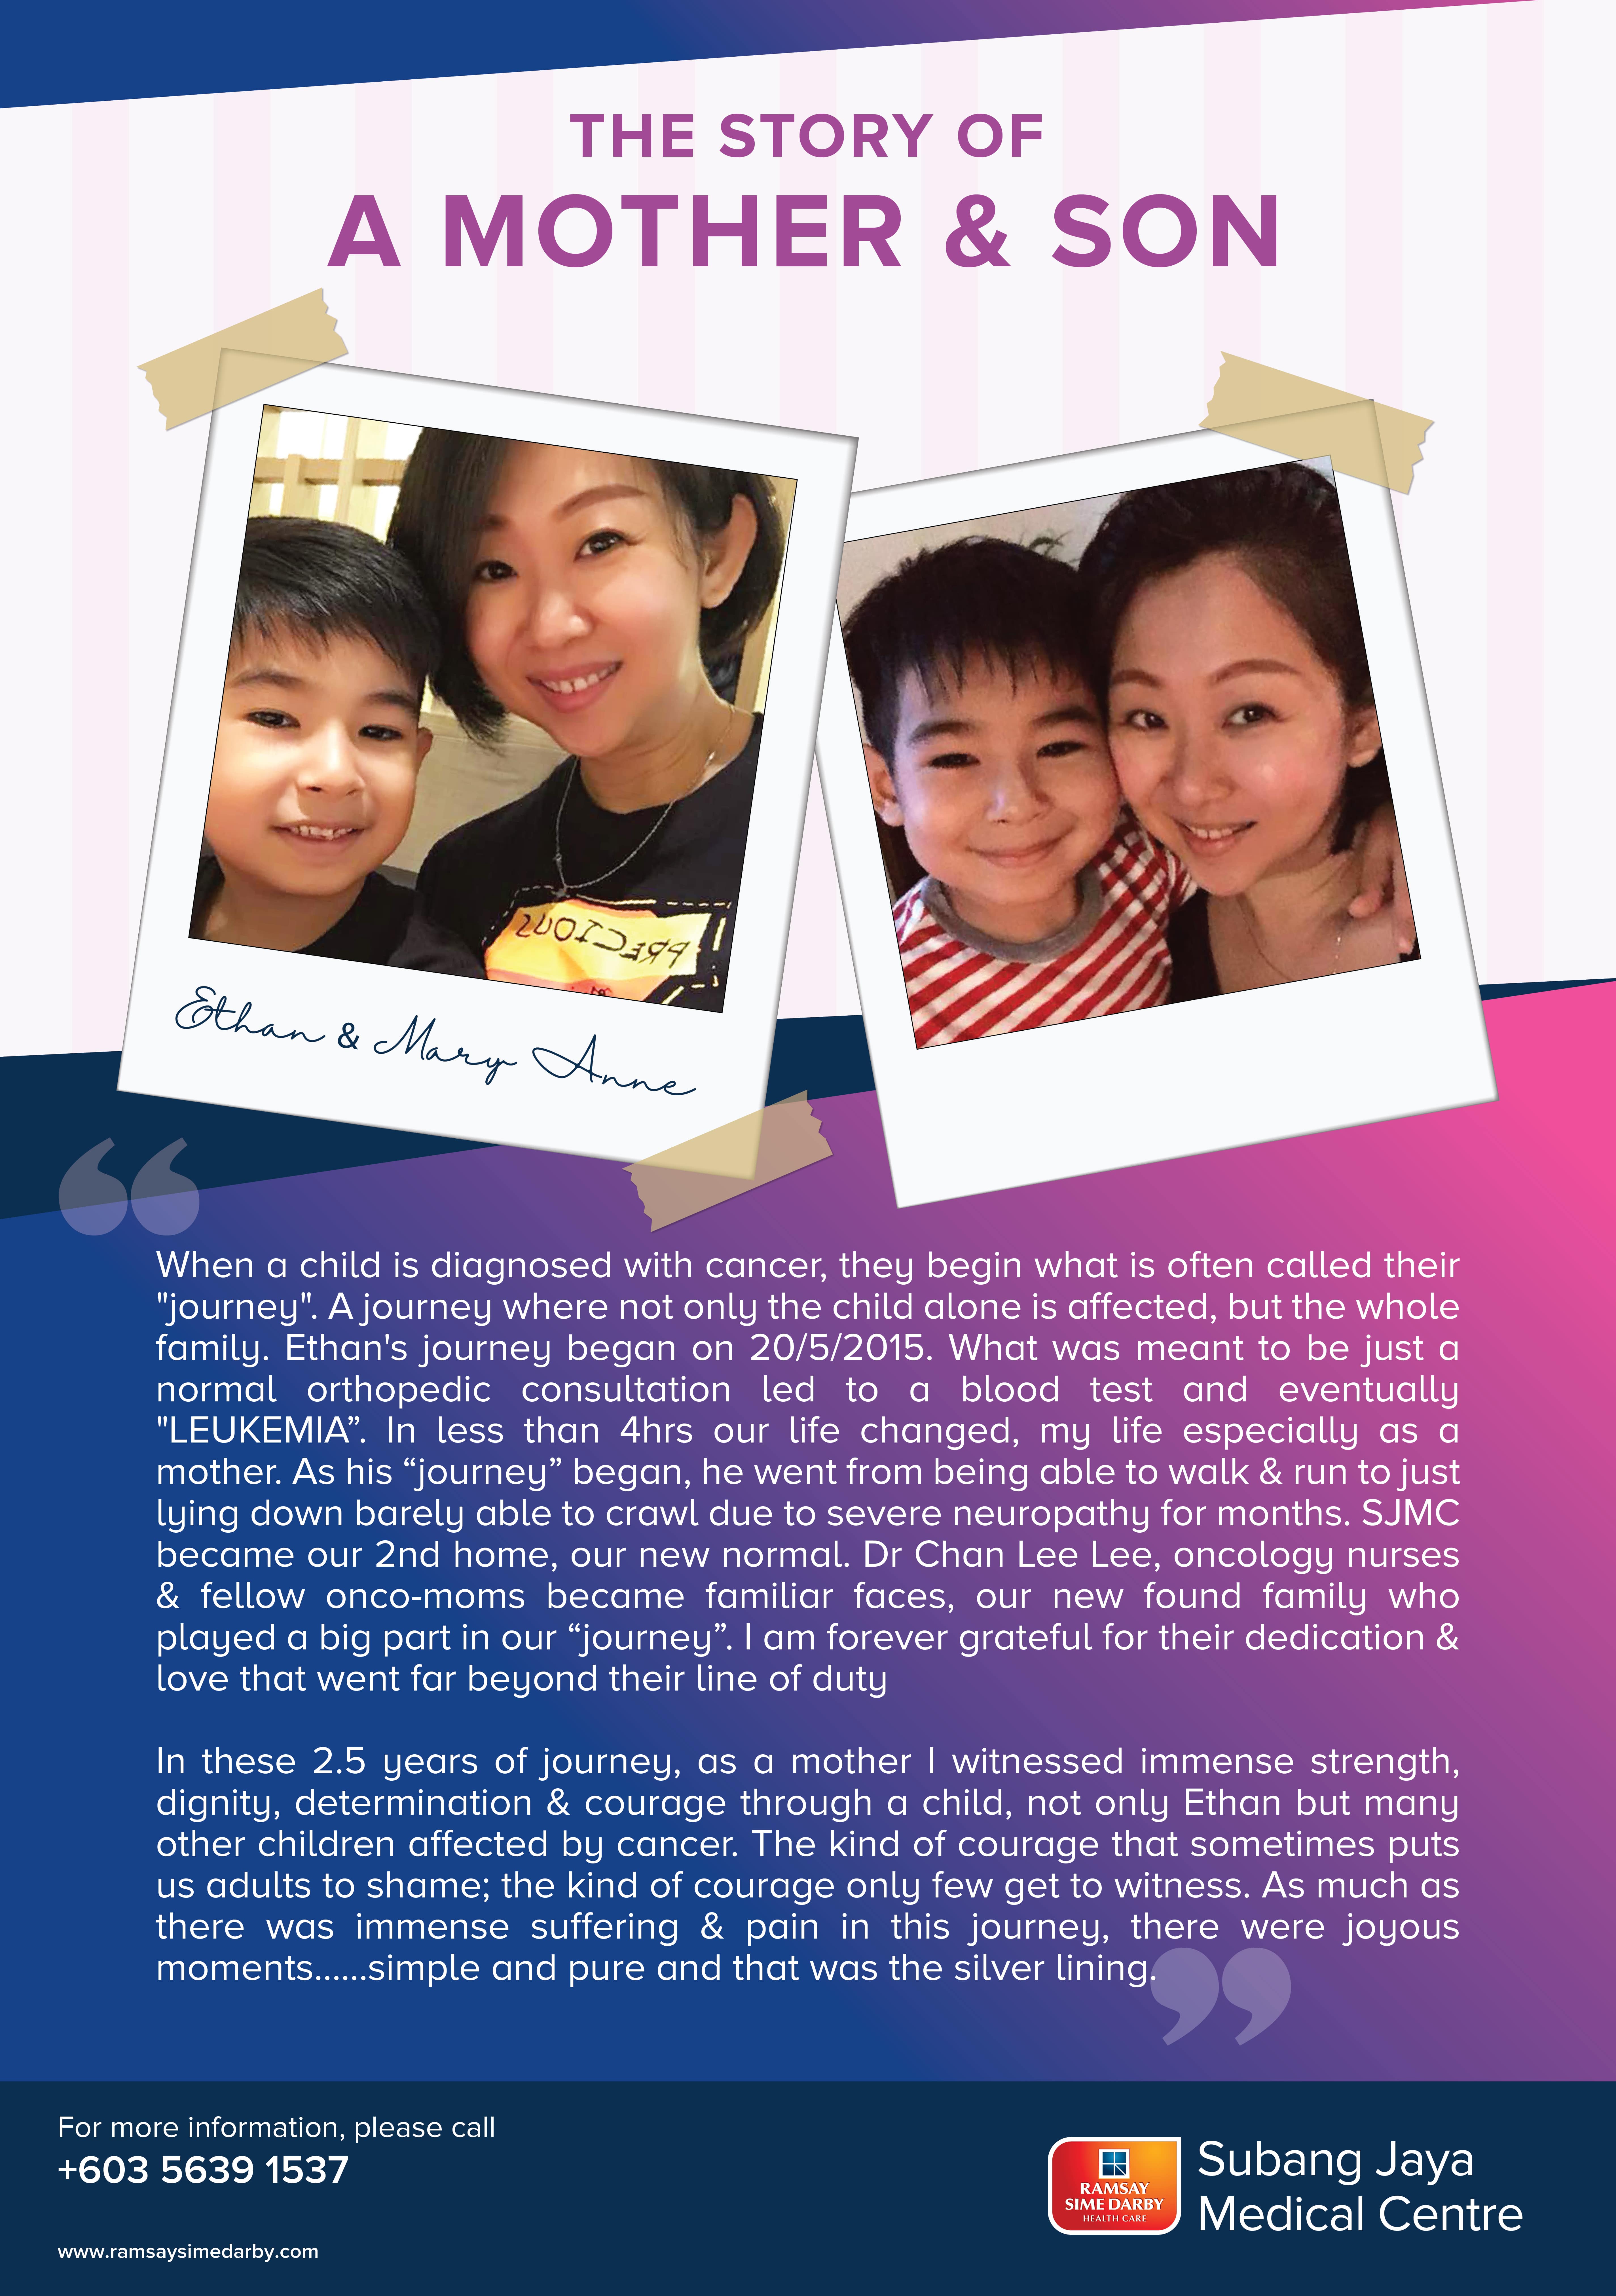 Patient Testimonial - Ethan & Mary Anne